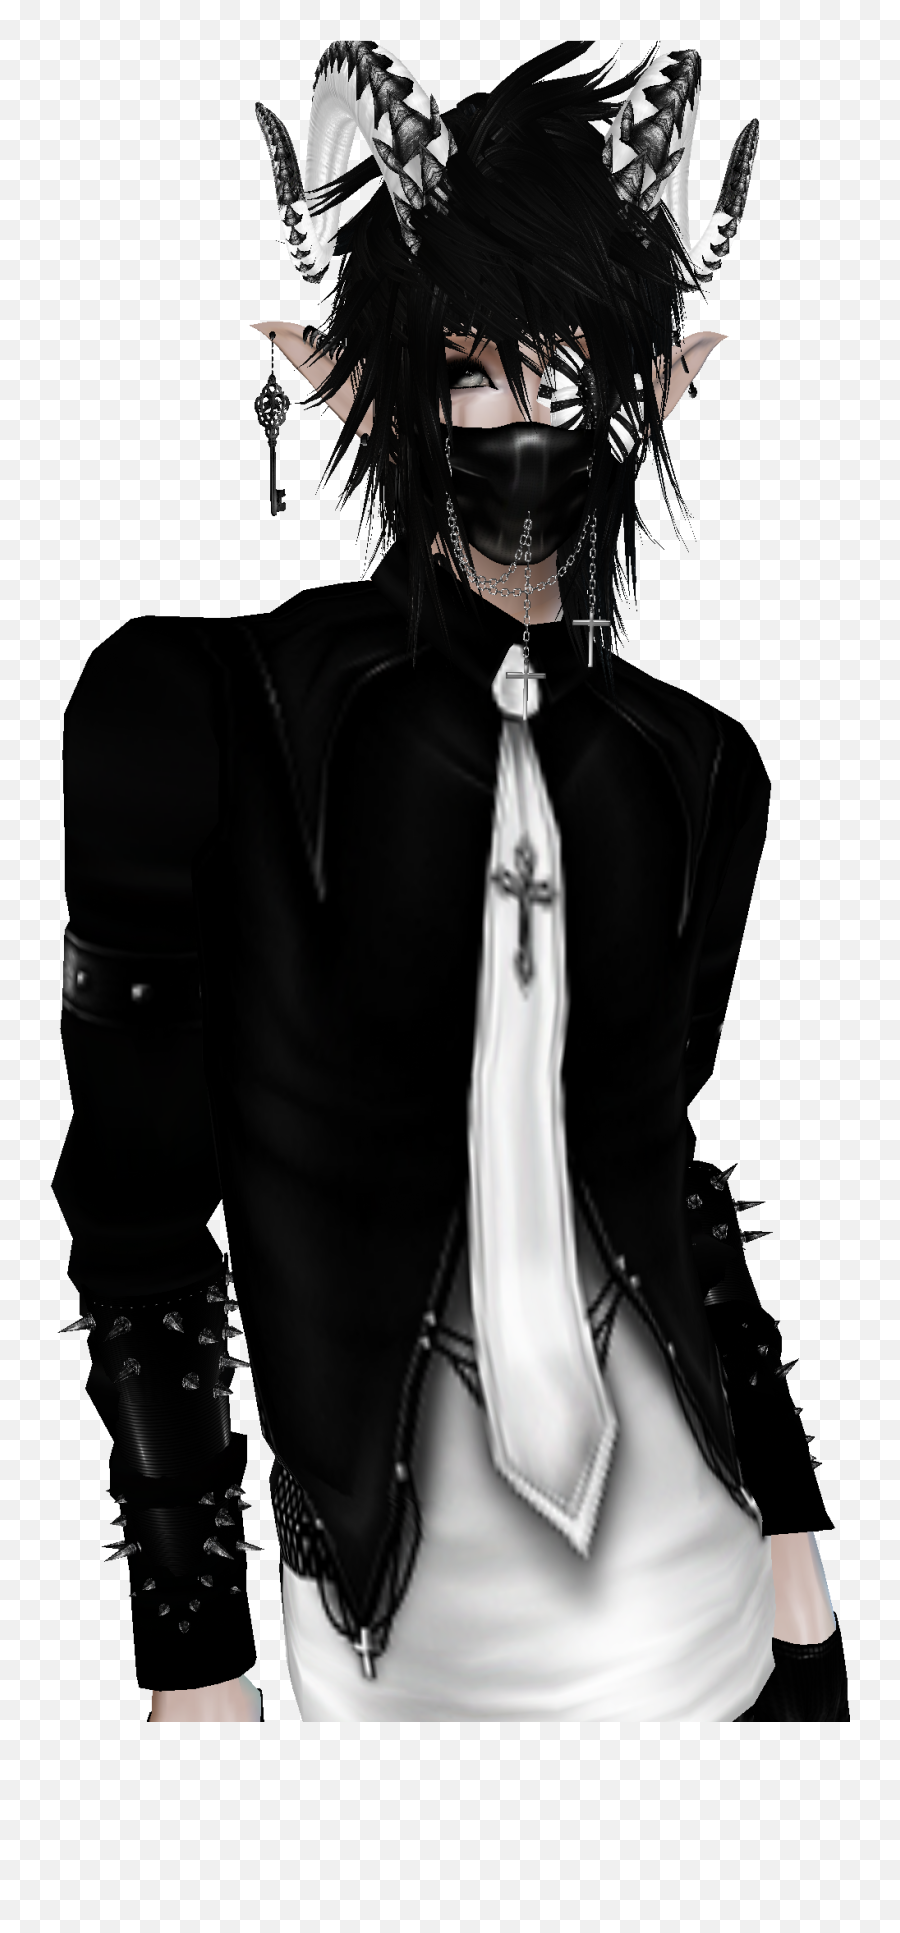 Pin On Imvu Stuff Related - Anime Man With Black Hair And Piercings Emoji,How To Draw Emotions Of Furries